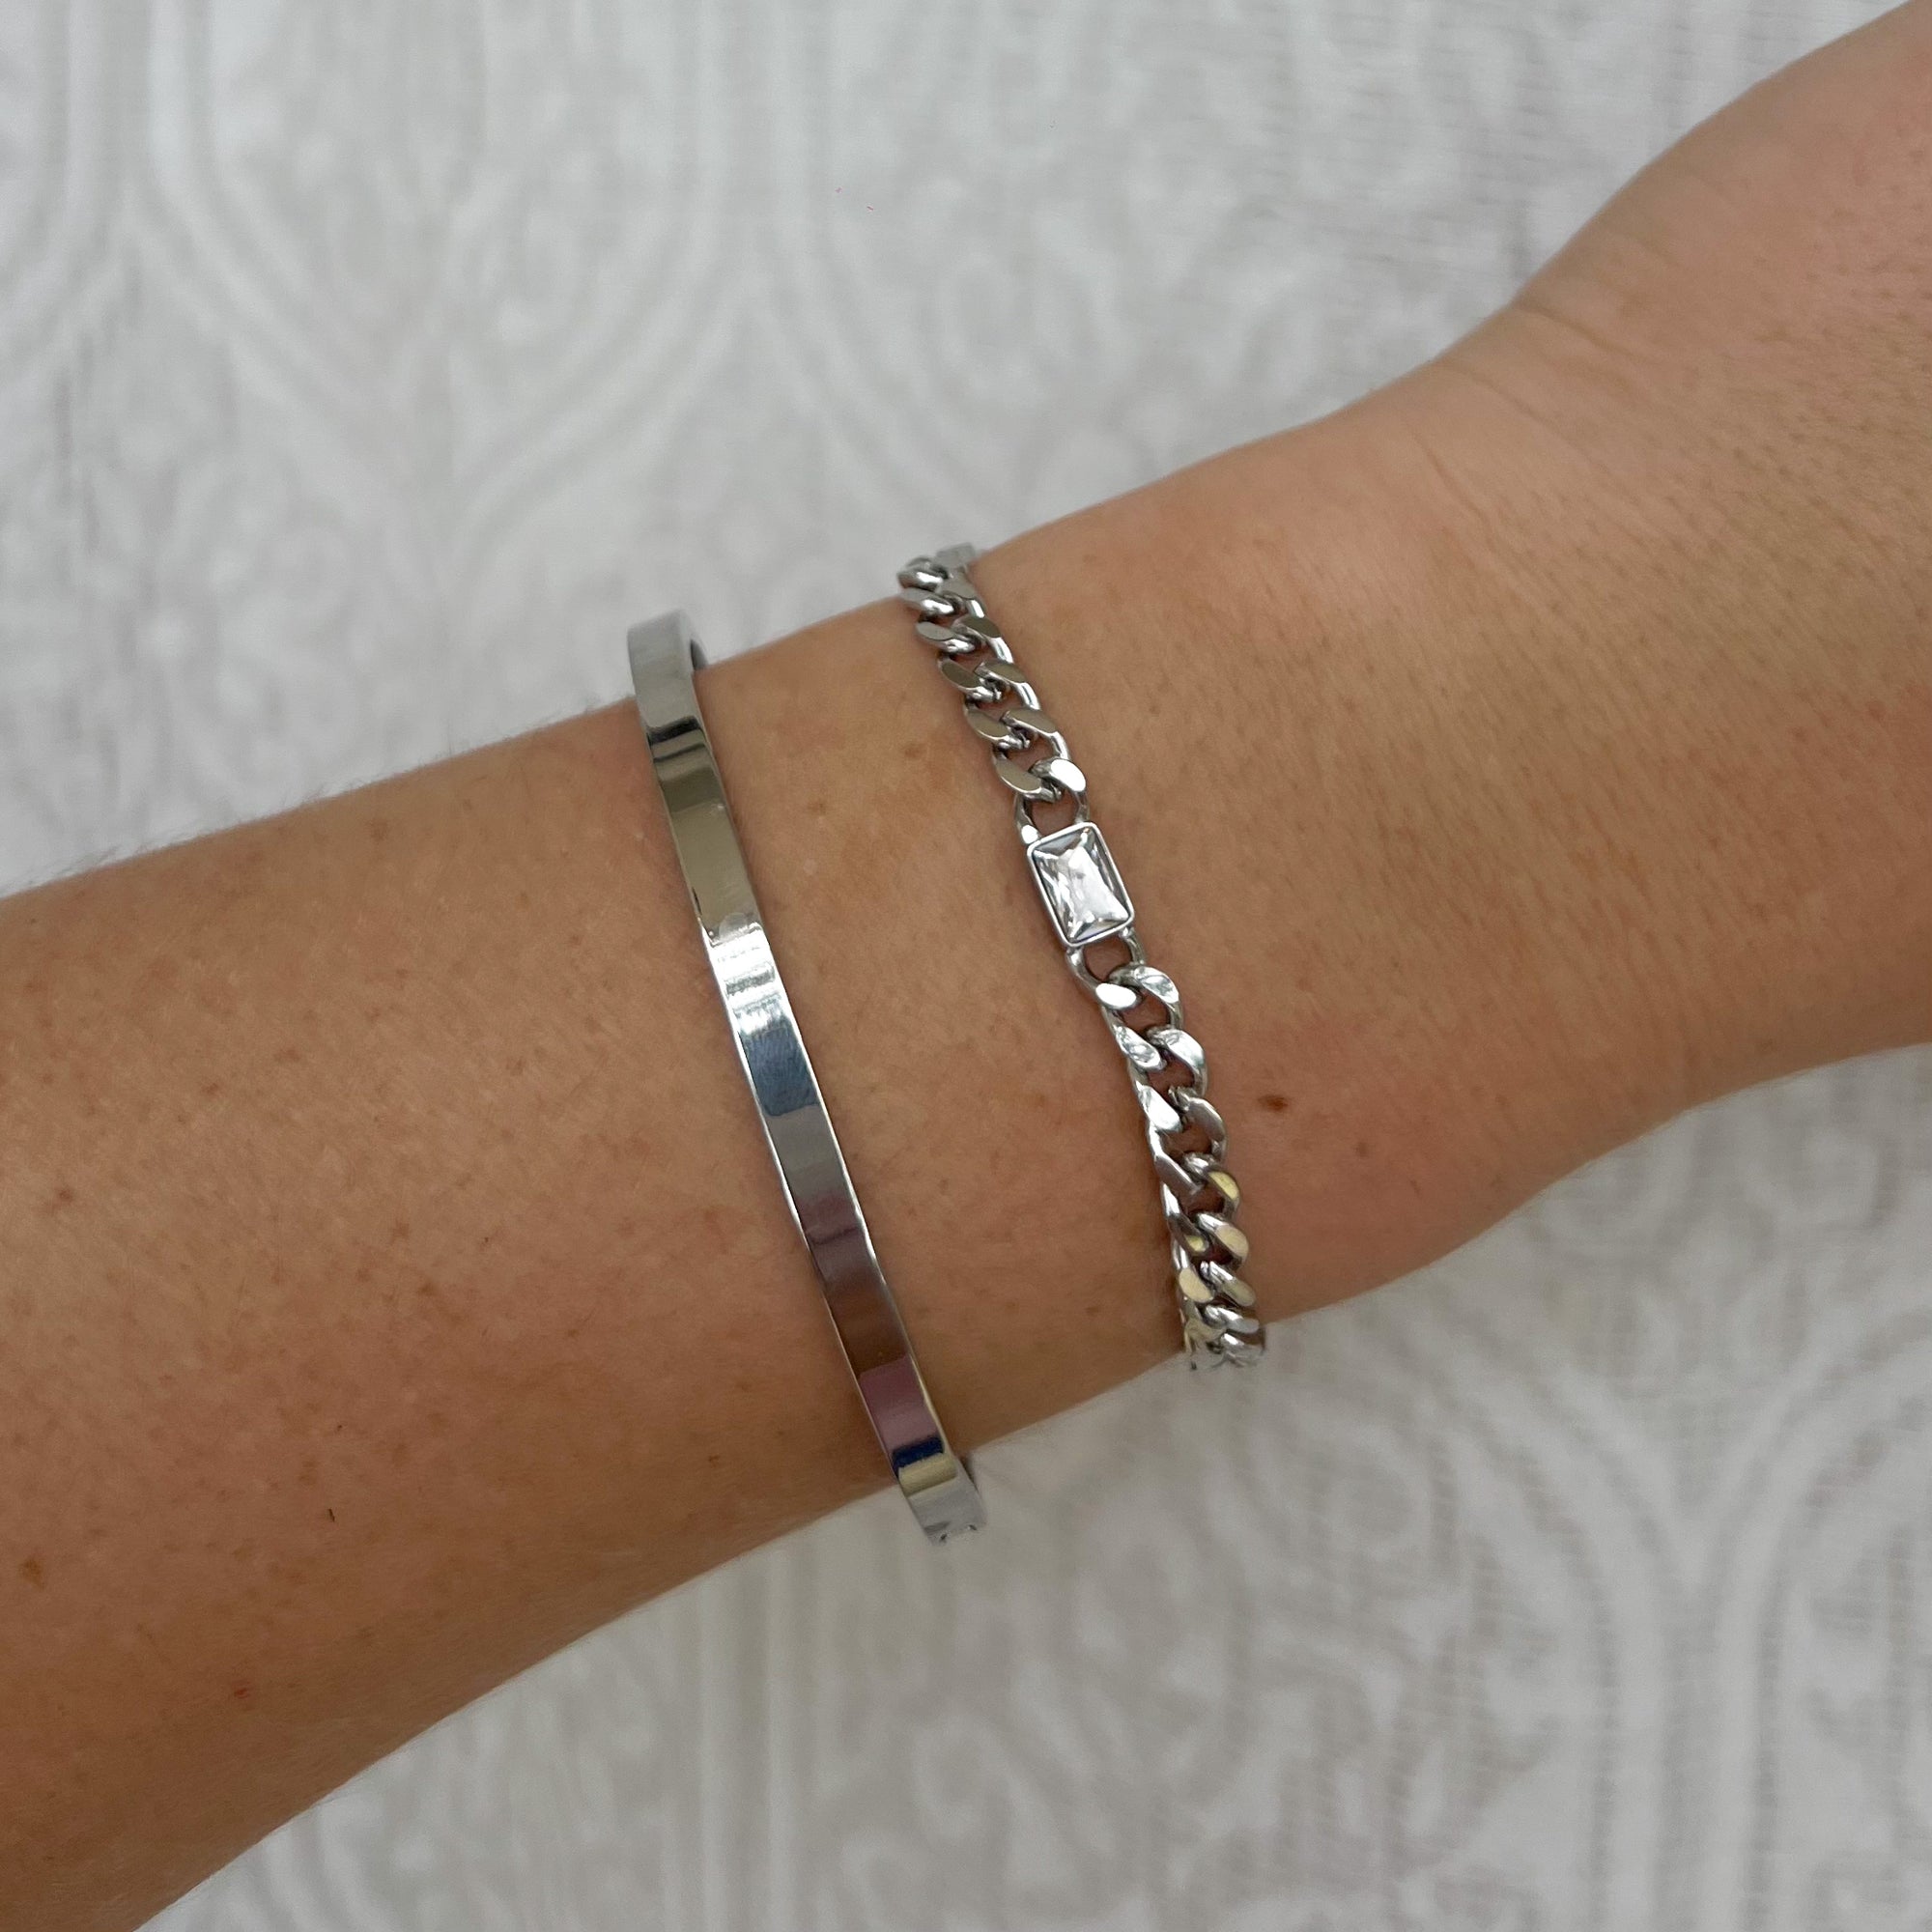 Edgy Bracelet - For the Girls Jewelry